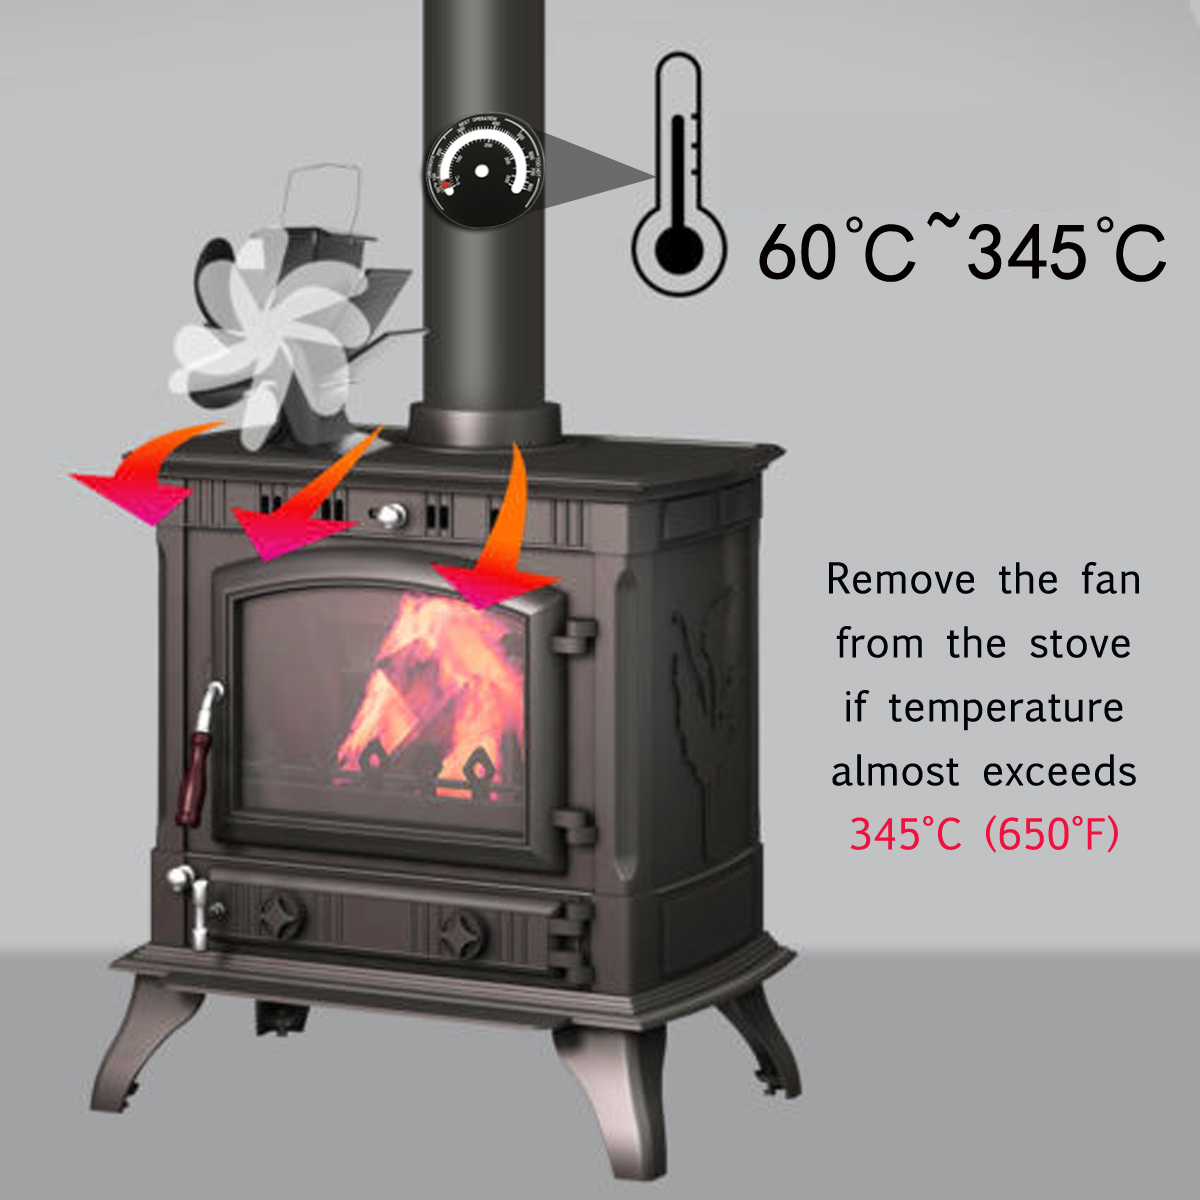 Fireplace Oven Best Of Details About 2 Blade Heat Powered Stove Fan W thermometer for Wood Log Burning Burner Stove